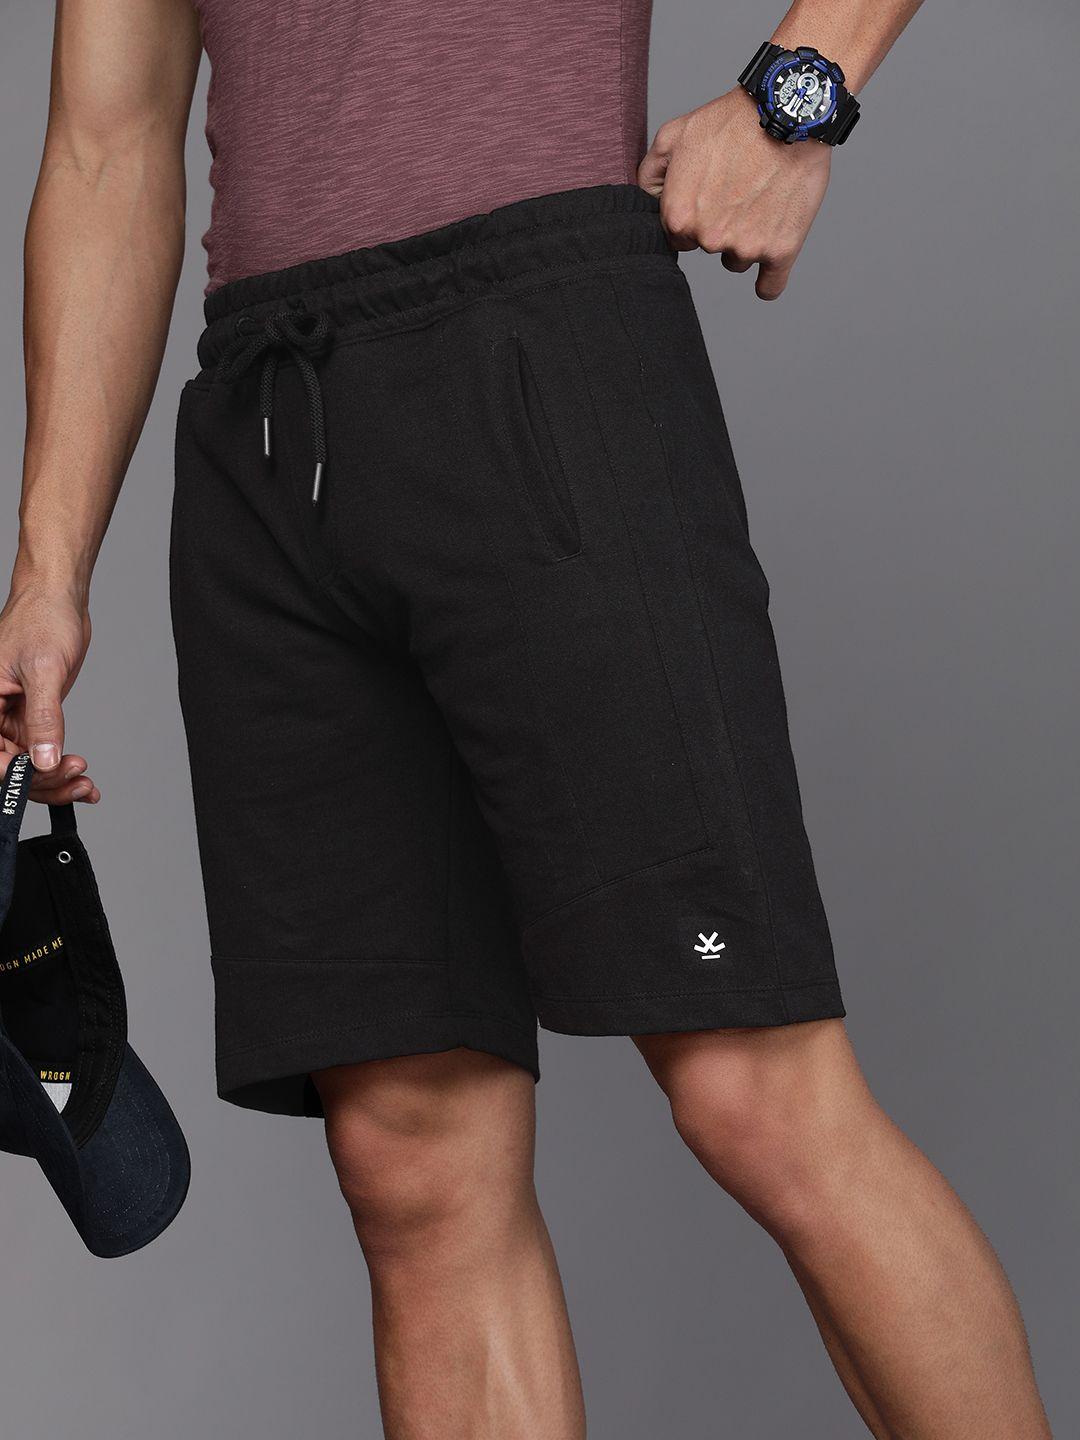 wrogn men solid mid rise above knee shorts